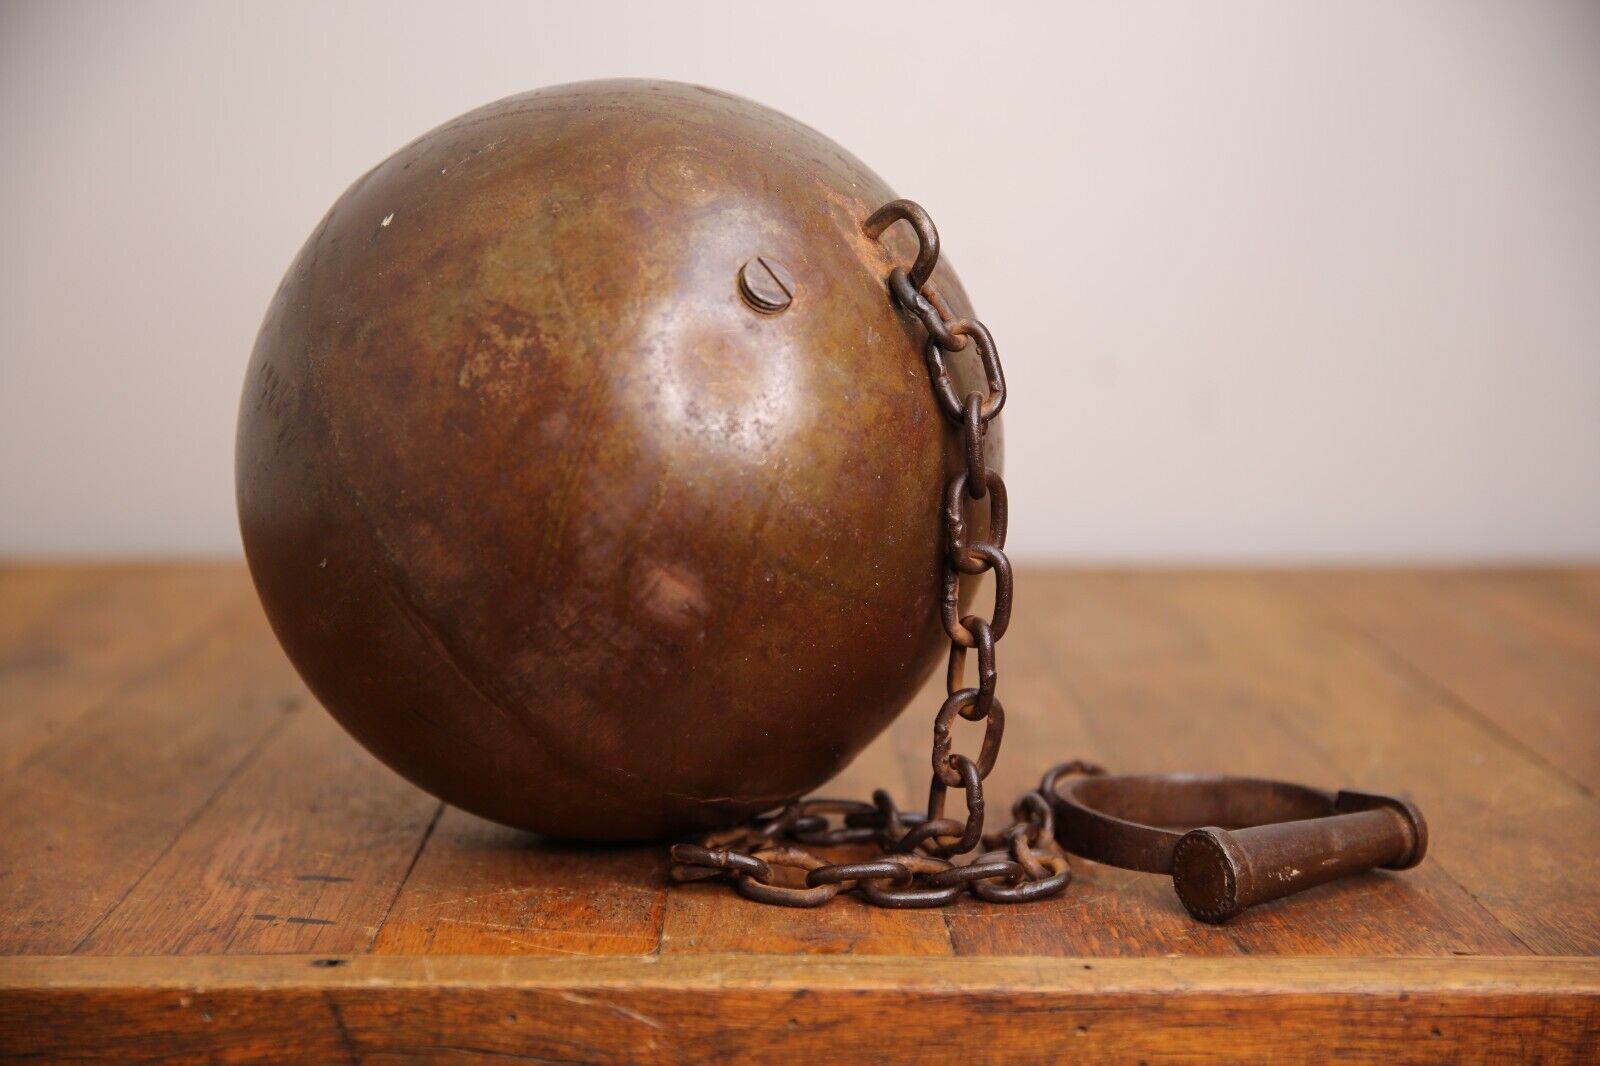 Vintage Antique Hand Forged Prisoners Ball and Chain Shackle cuff Jail Prison